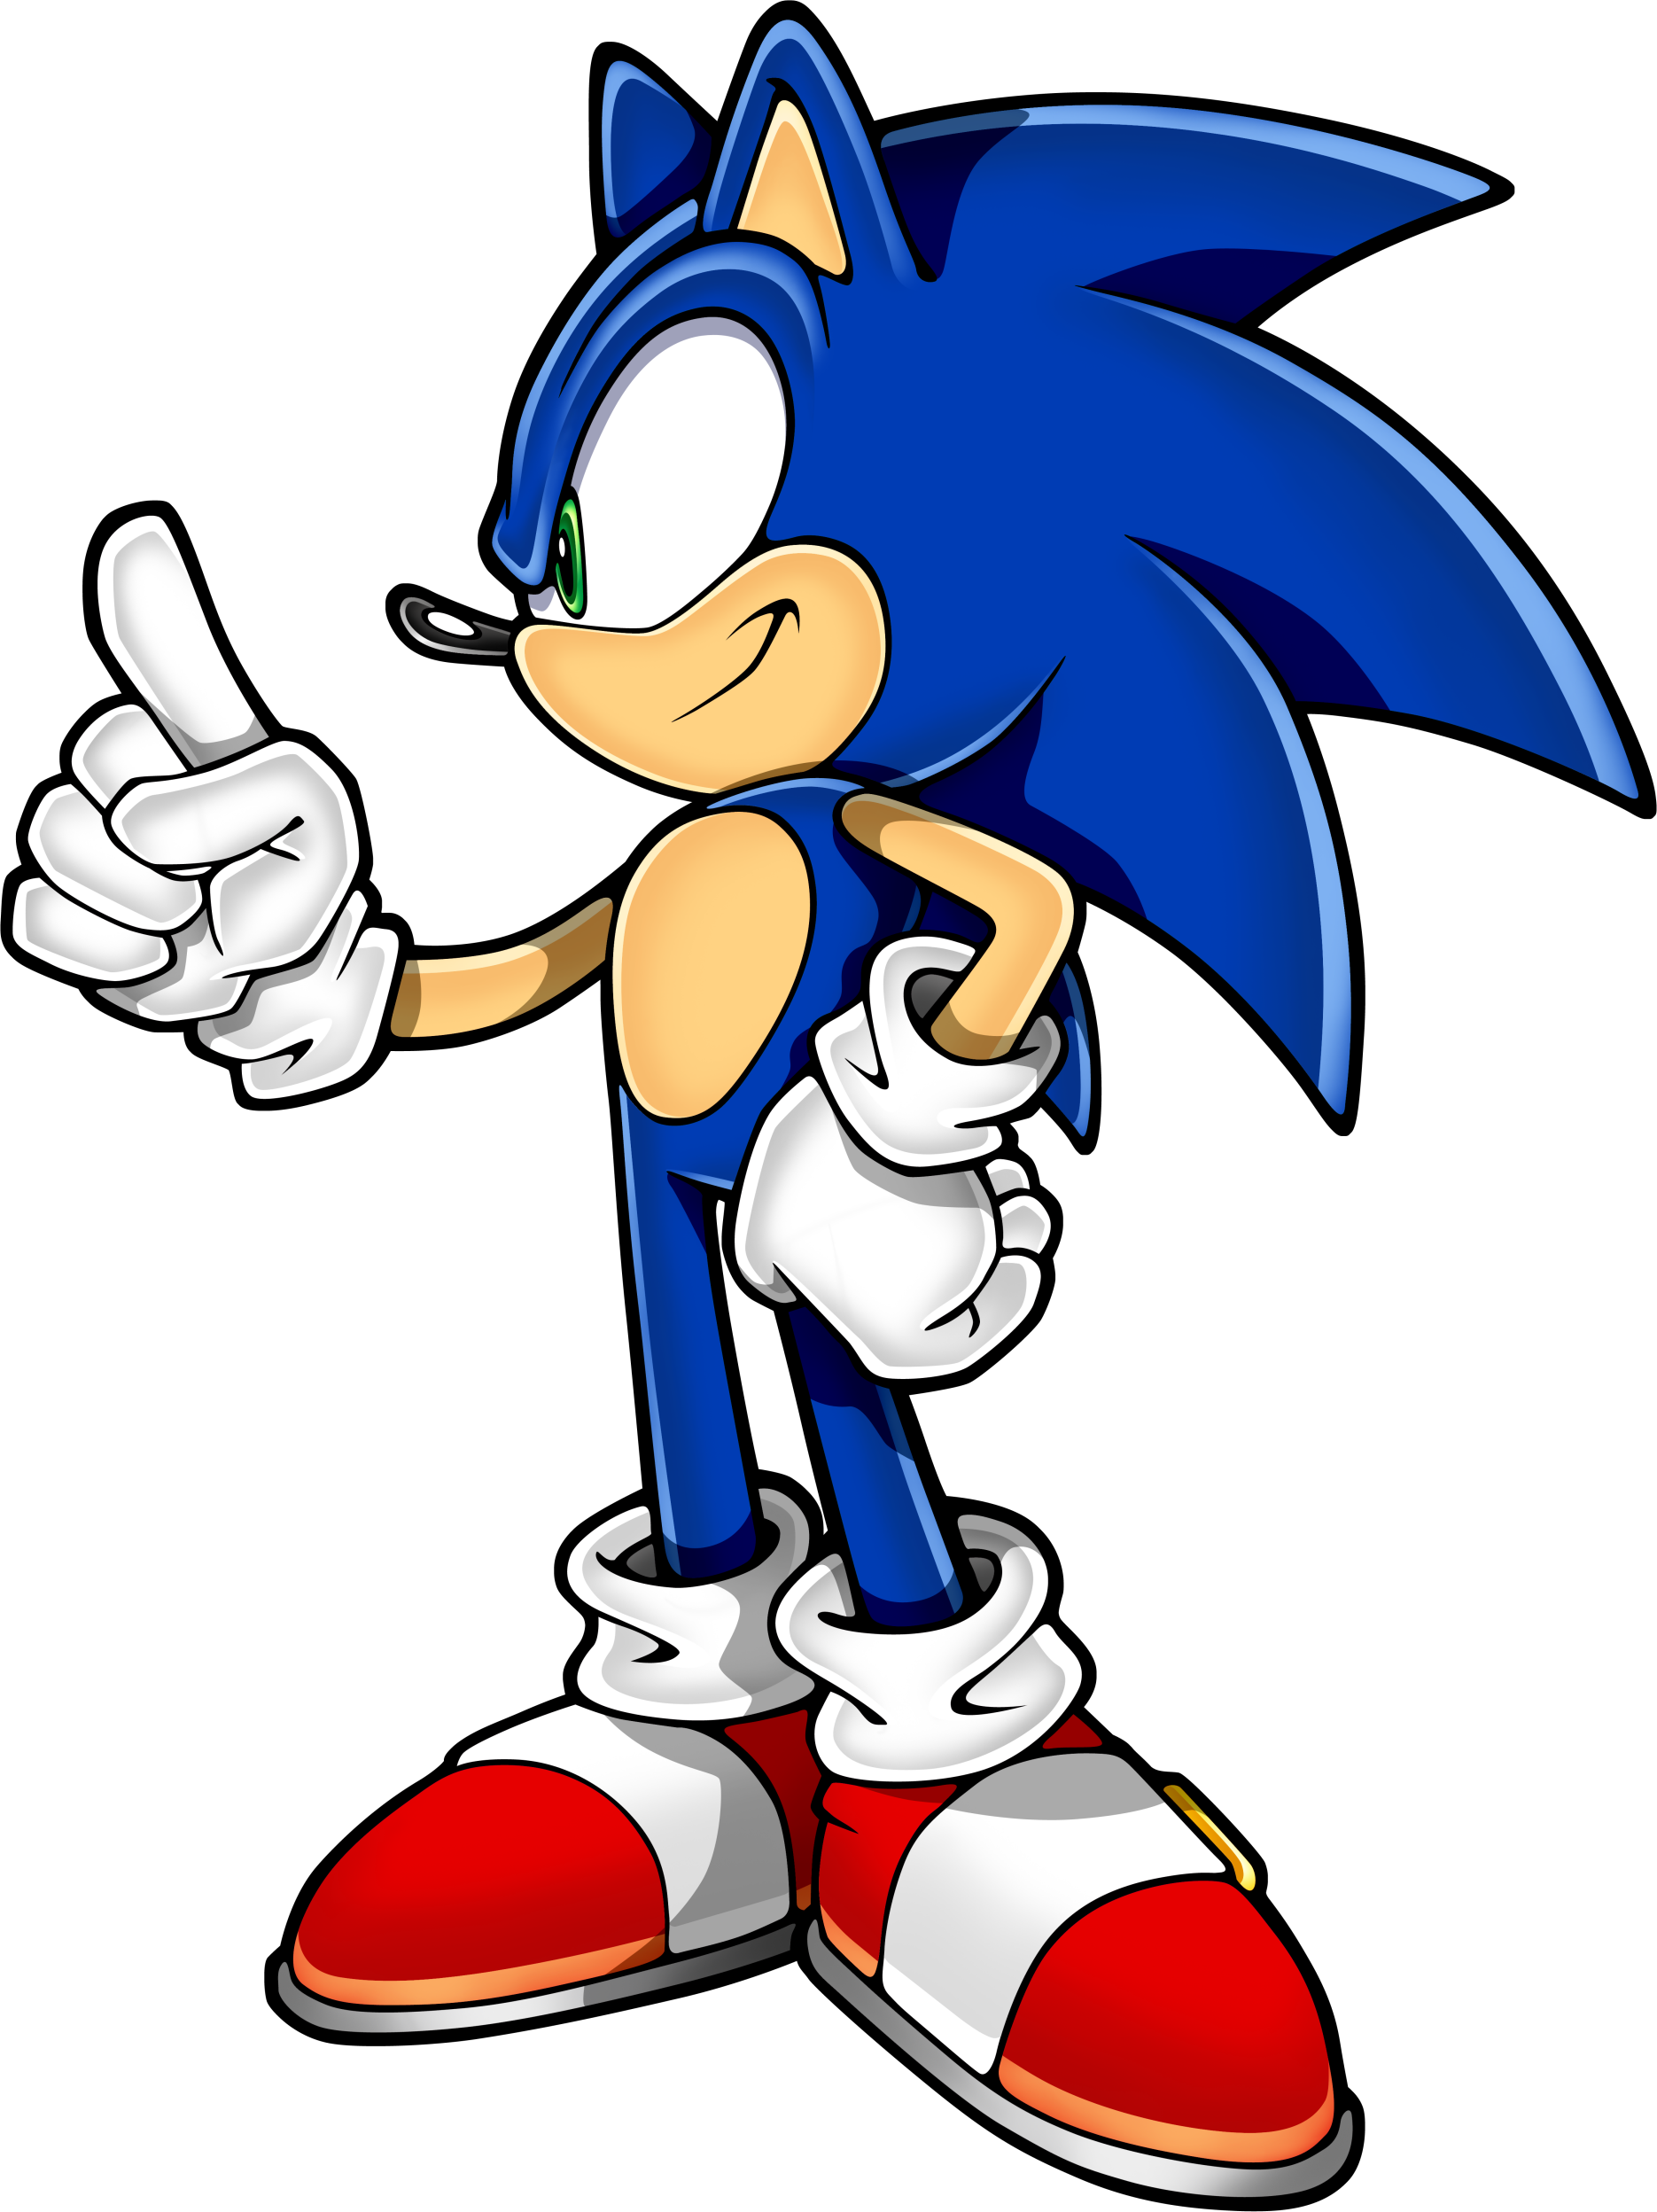 Sonic The Hedgehog Image PNG Image